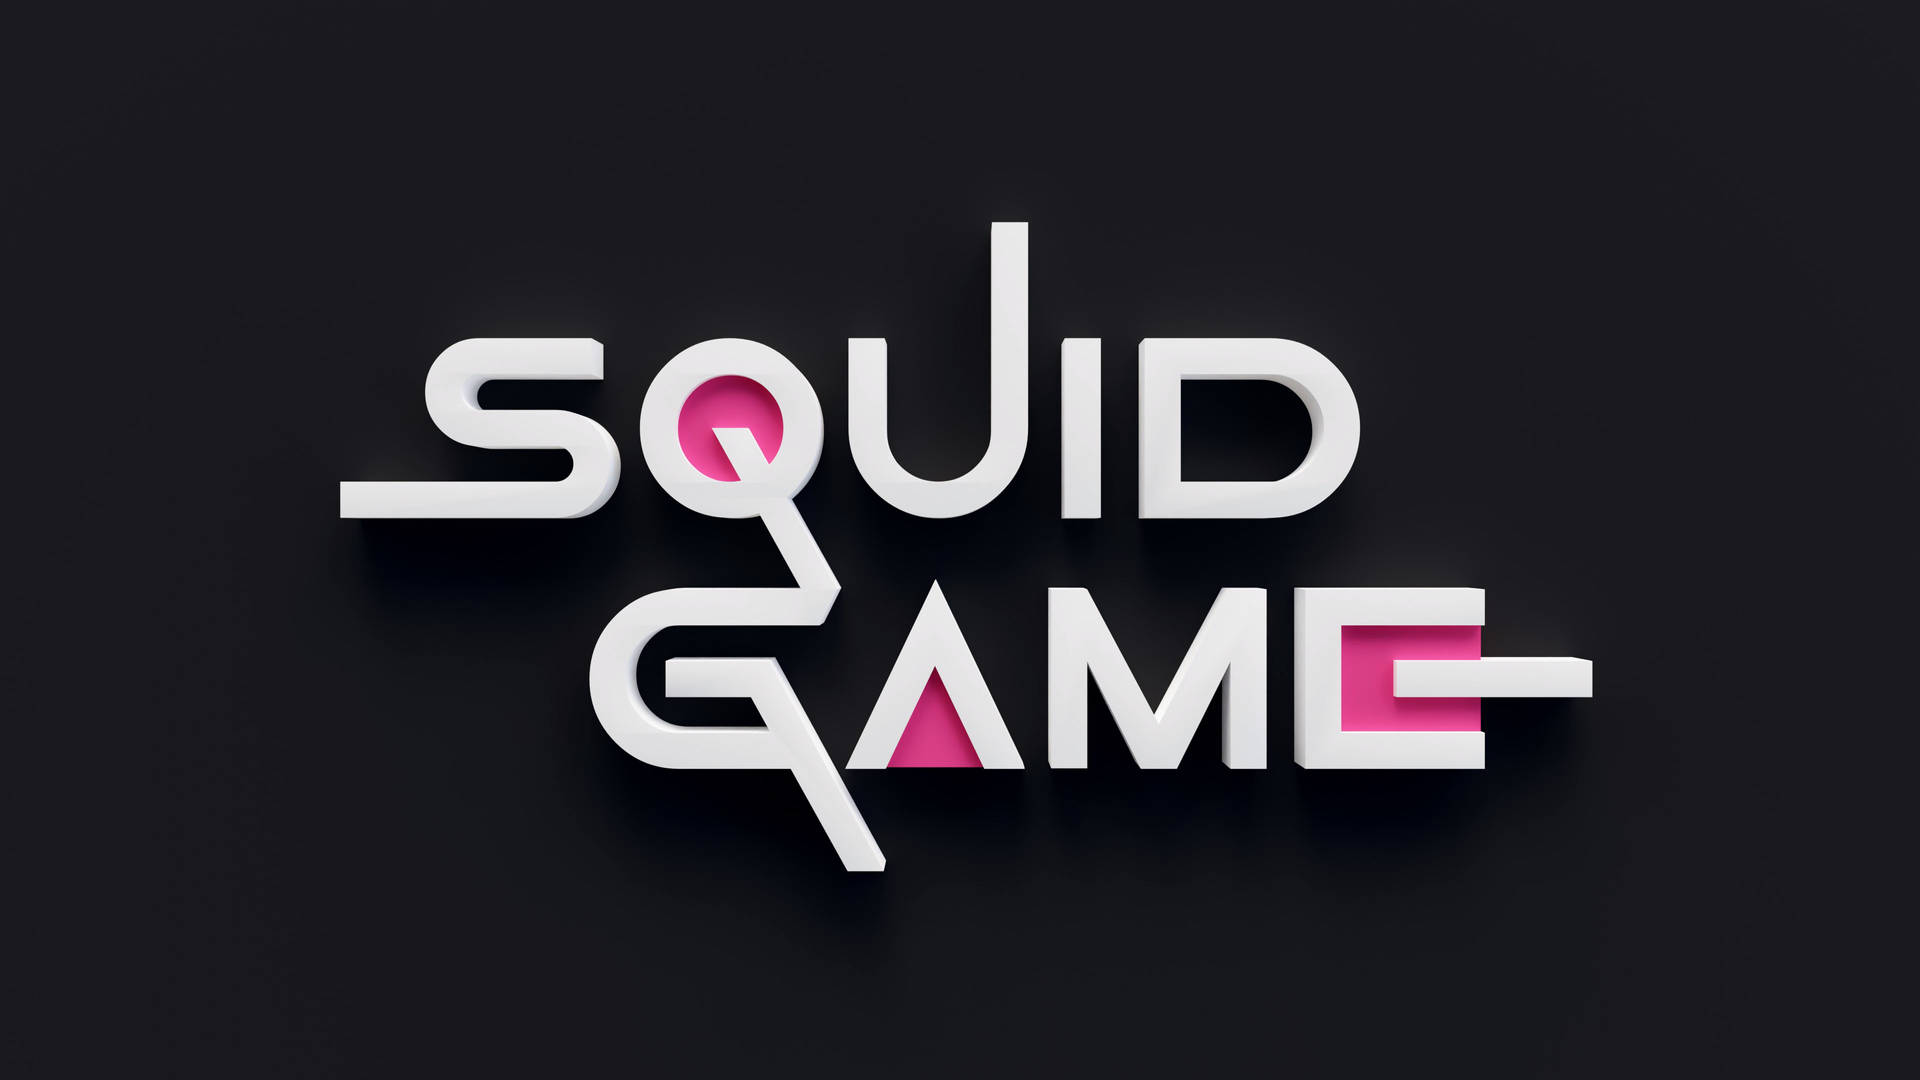 3840X2160 Squid Game Wallpaper and Background